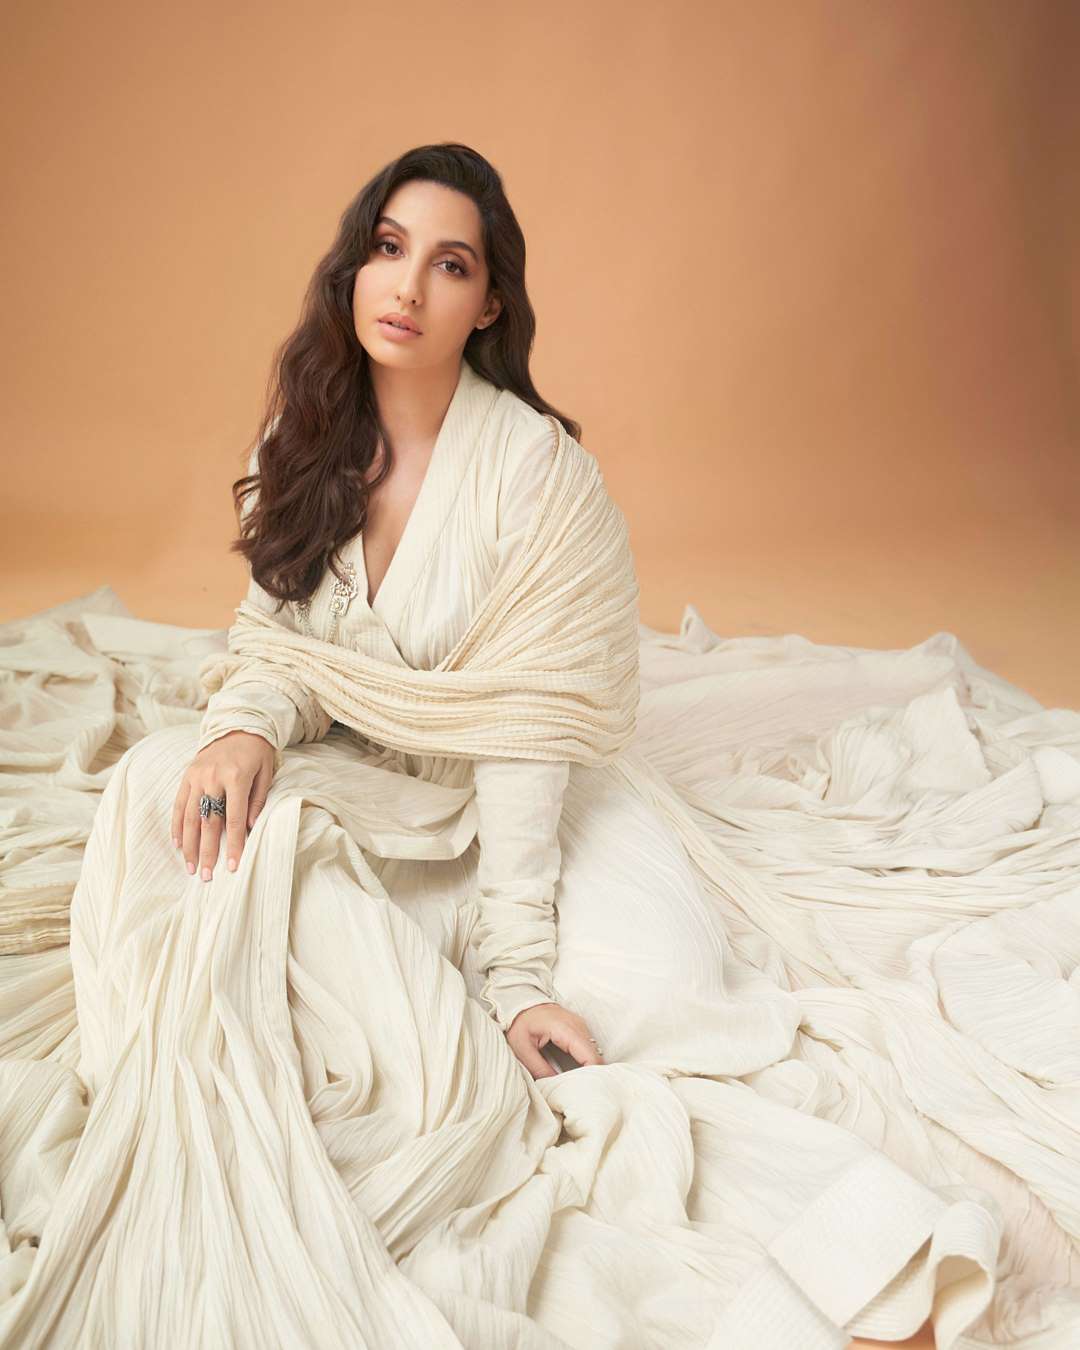 Nora Fatehi is exuding grace and poise in the off-white suit.